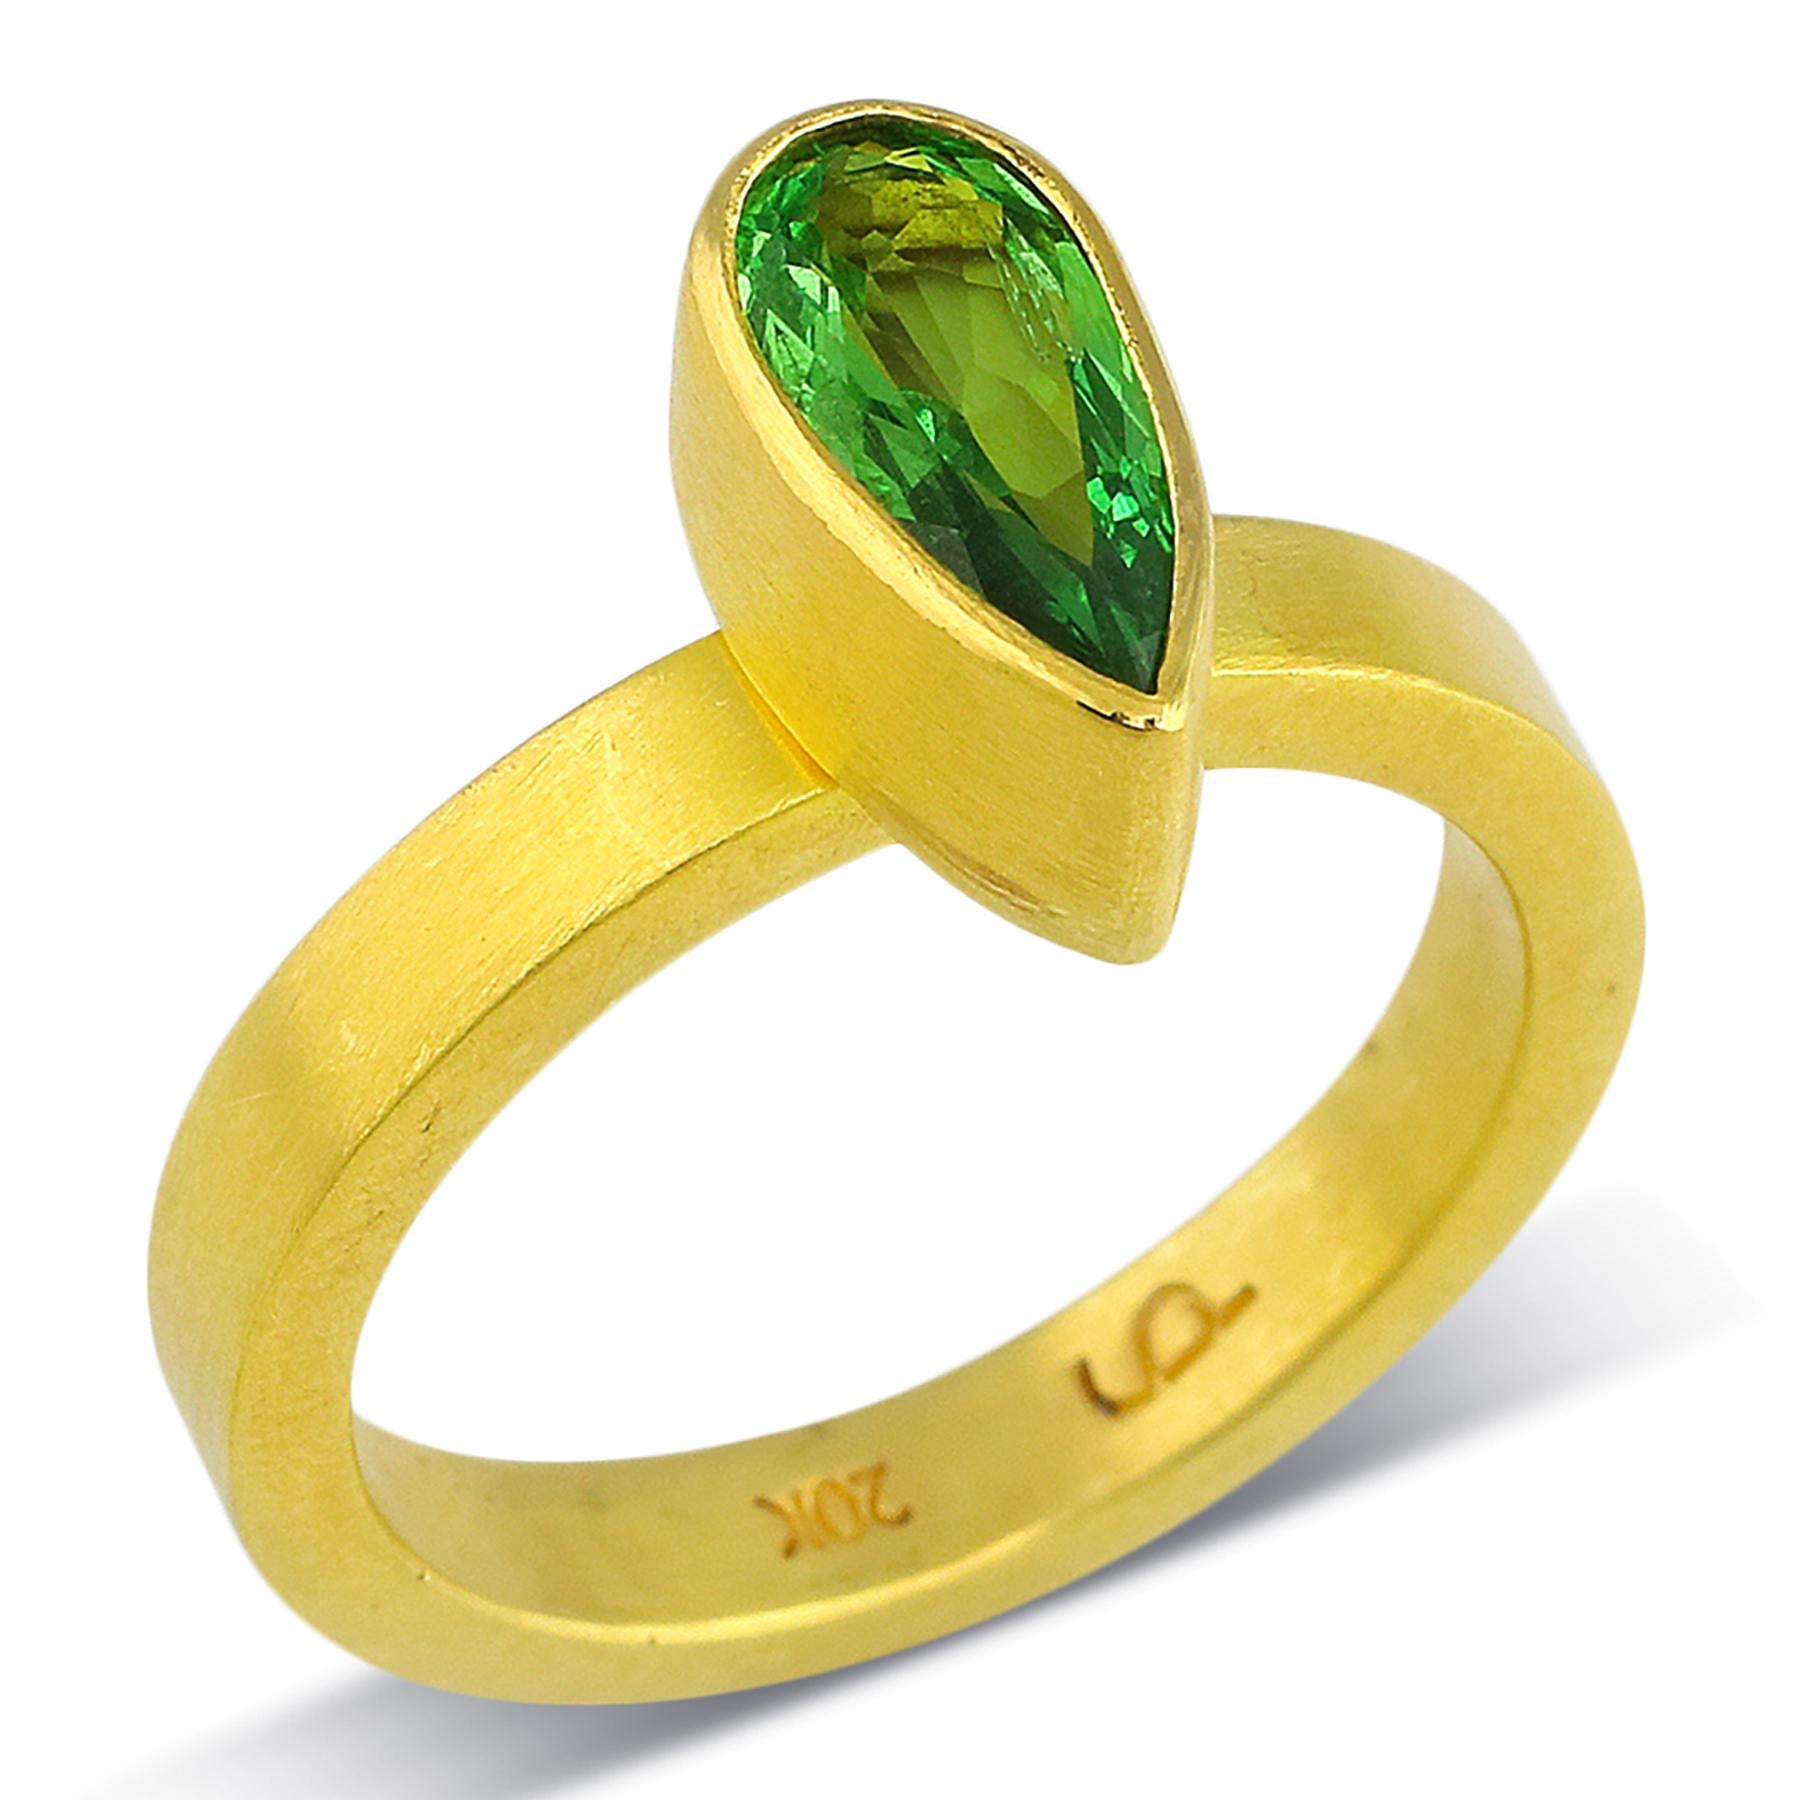 Artisan PHILIPPE SPENCER 1.02 Ct. Rare Tsavorite in 22K and 20K Gold Statement Ring For Sale